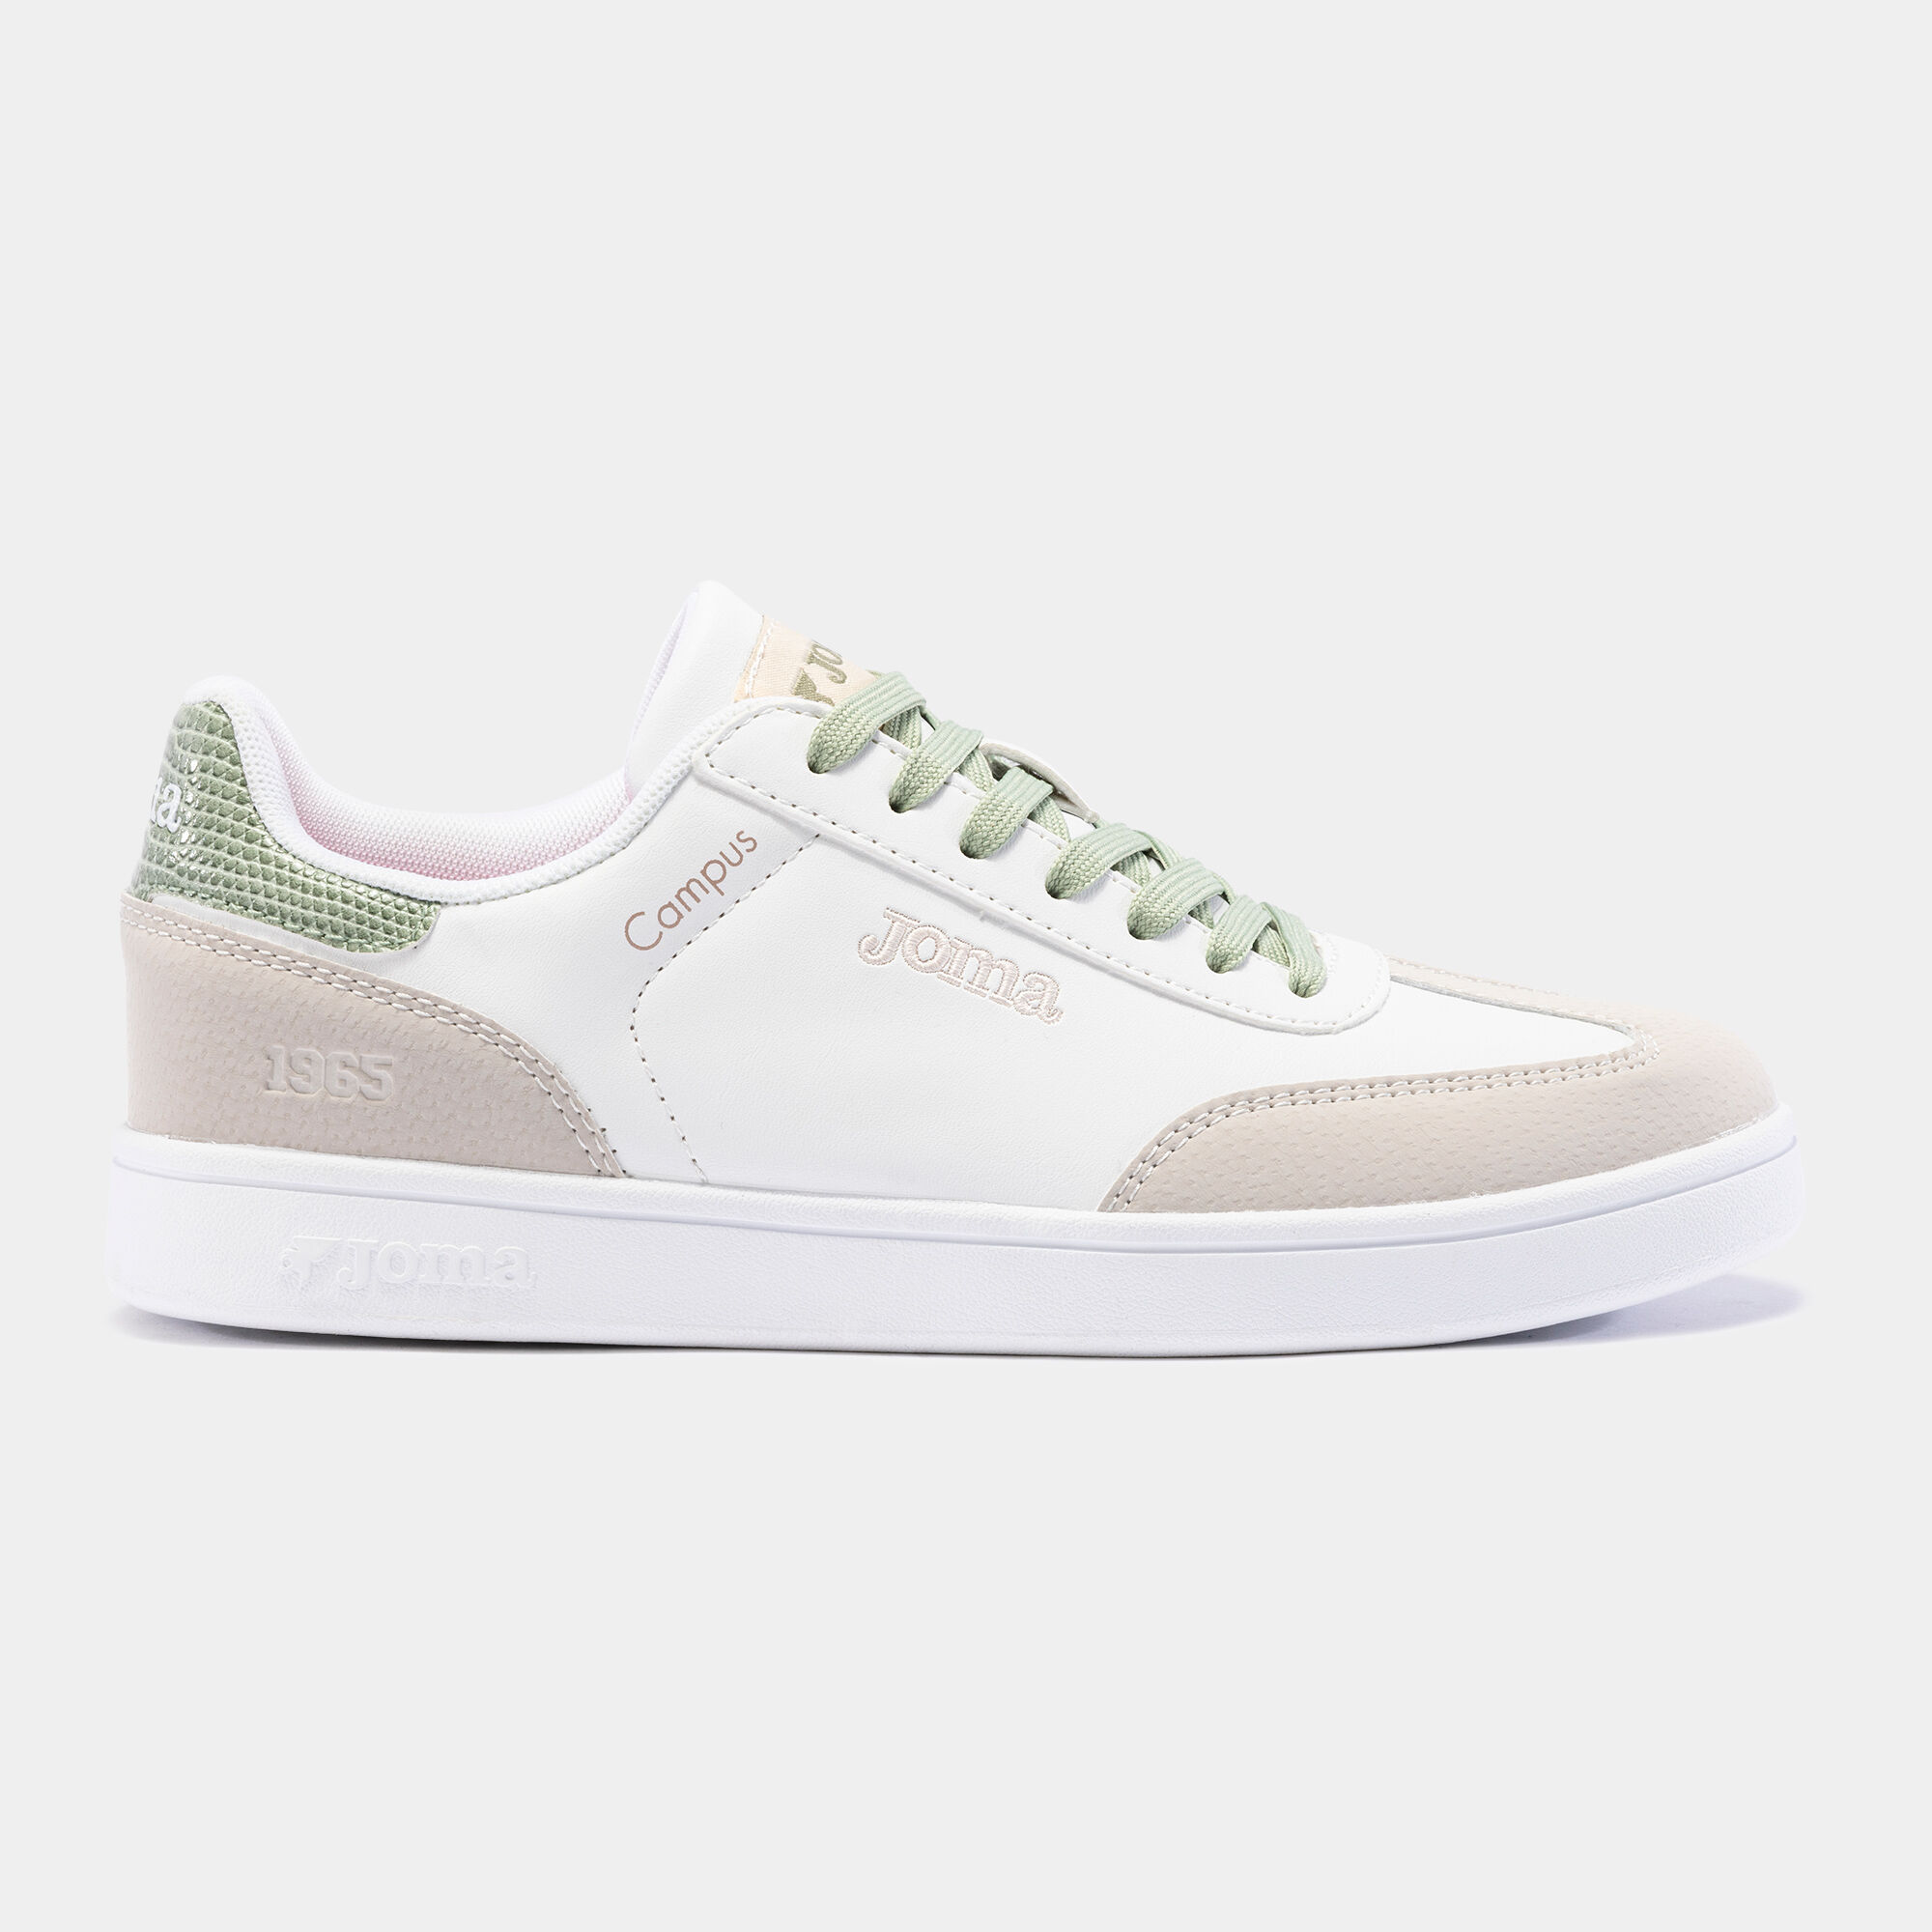 Chaussures casual C.Campus Lady 24 femme blanc vert mx